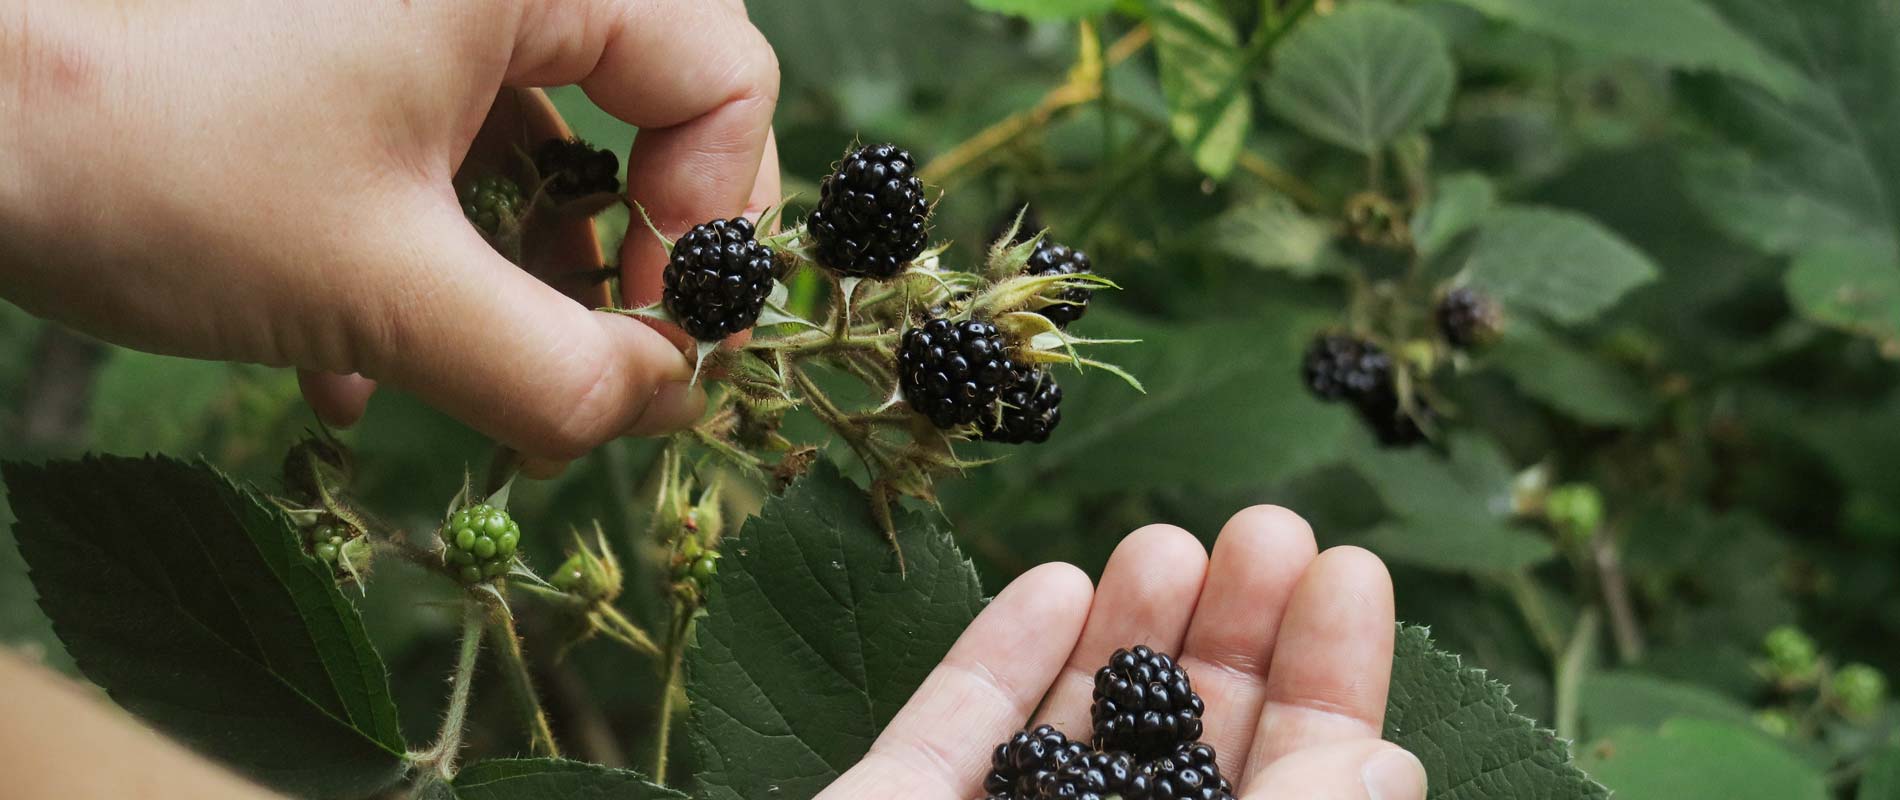 Pick wild berries on your next foraging trip